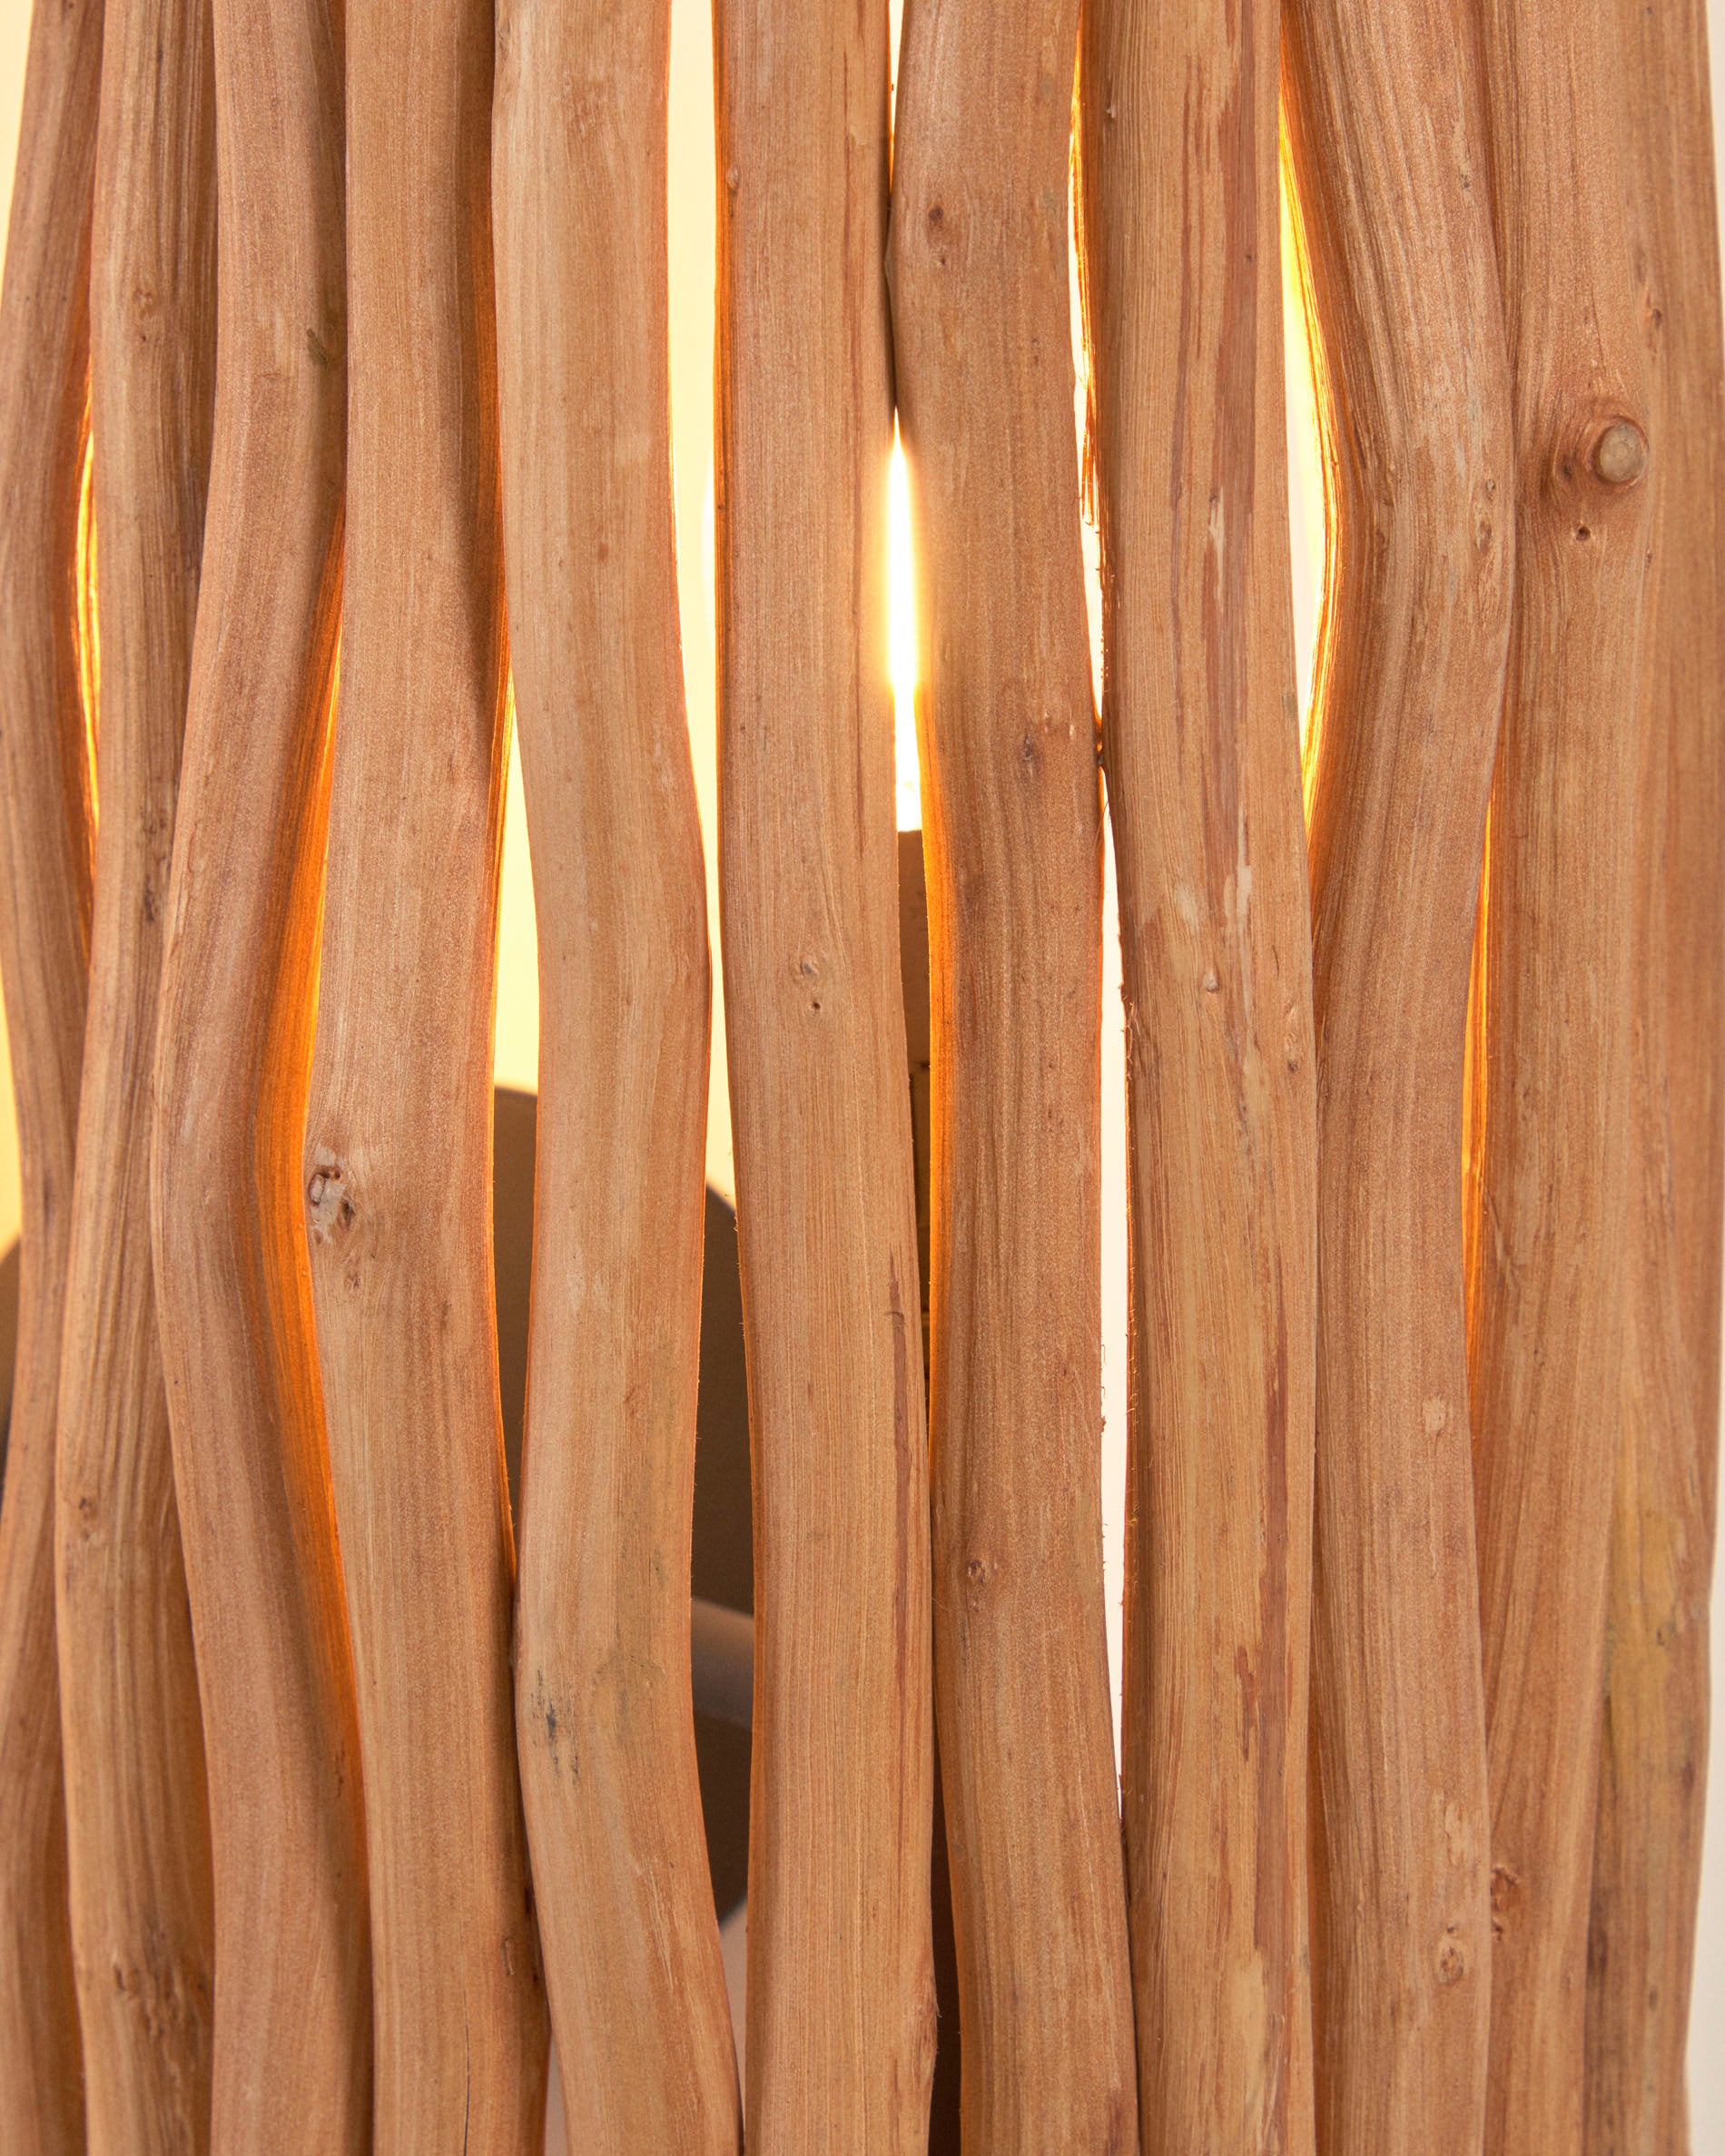 Crescencia wall lamp in a natural, aged wood design